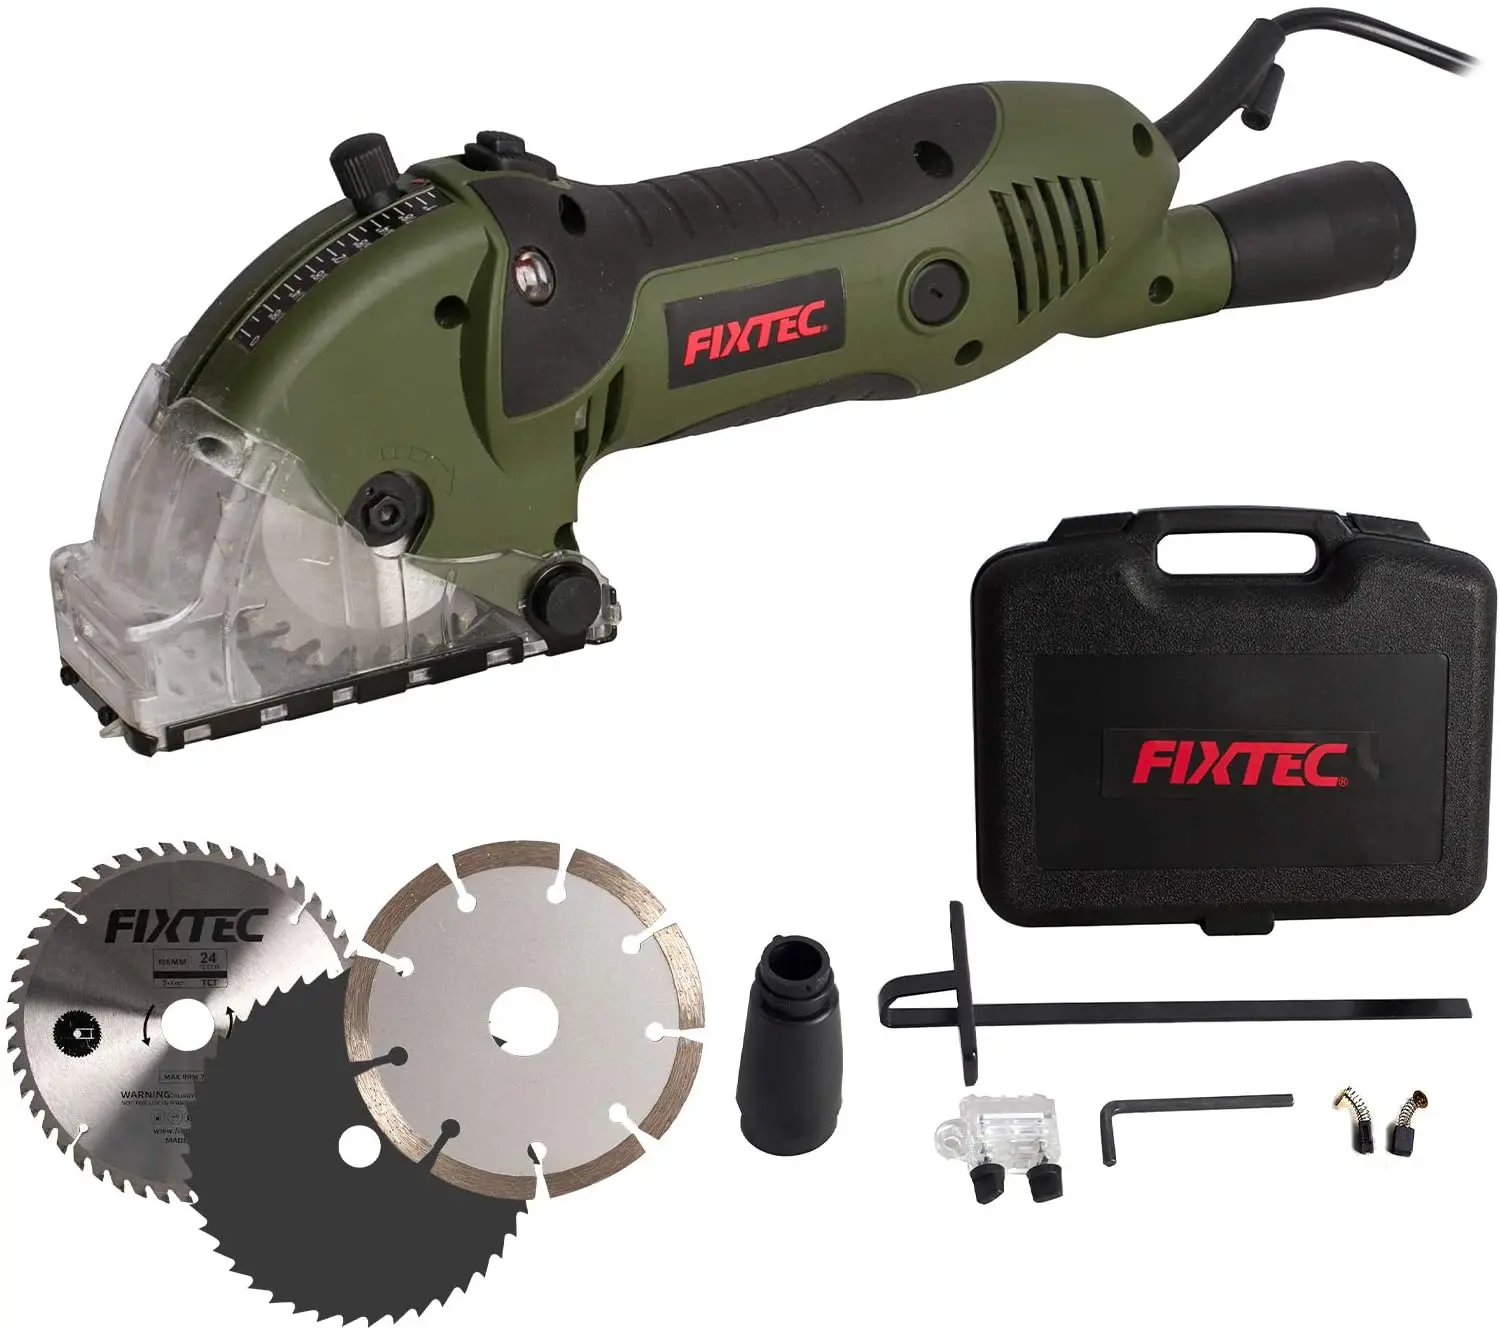 

Mini Circular Saw, Compact Electric Circular Saw with 3 Saw Blades 4A Pure Copper Motor, 4000RPM, Metal wall plate